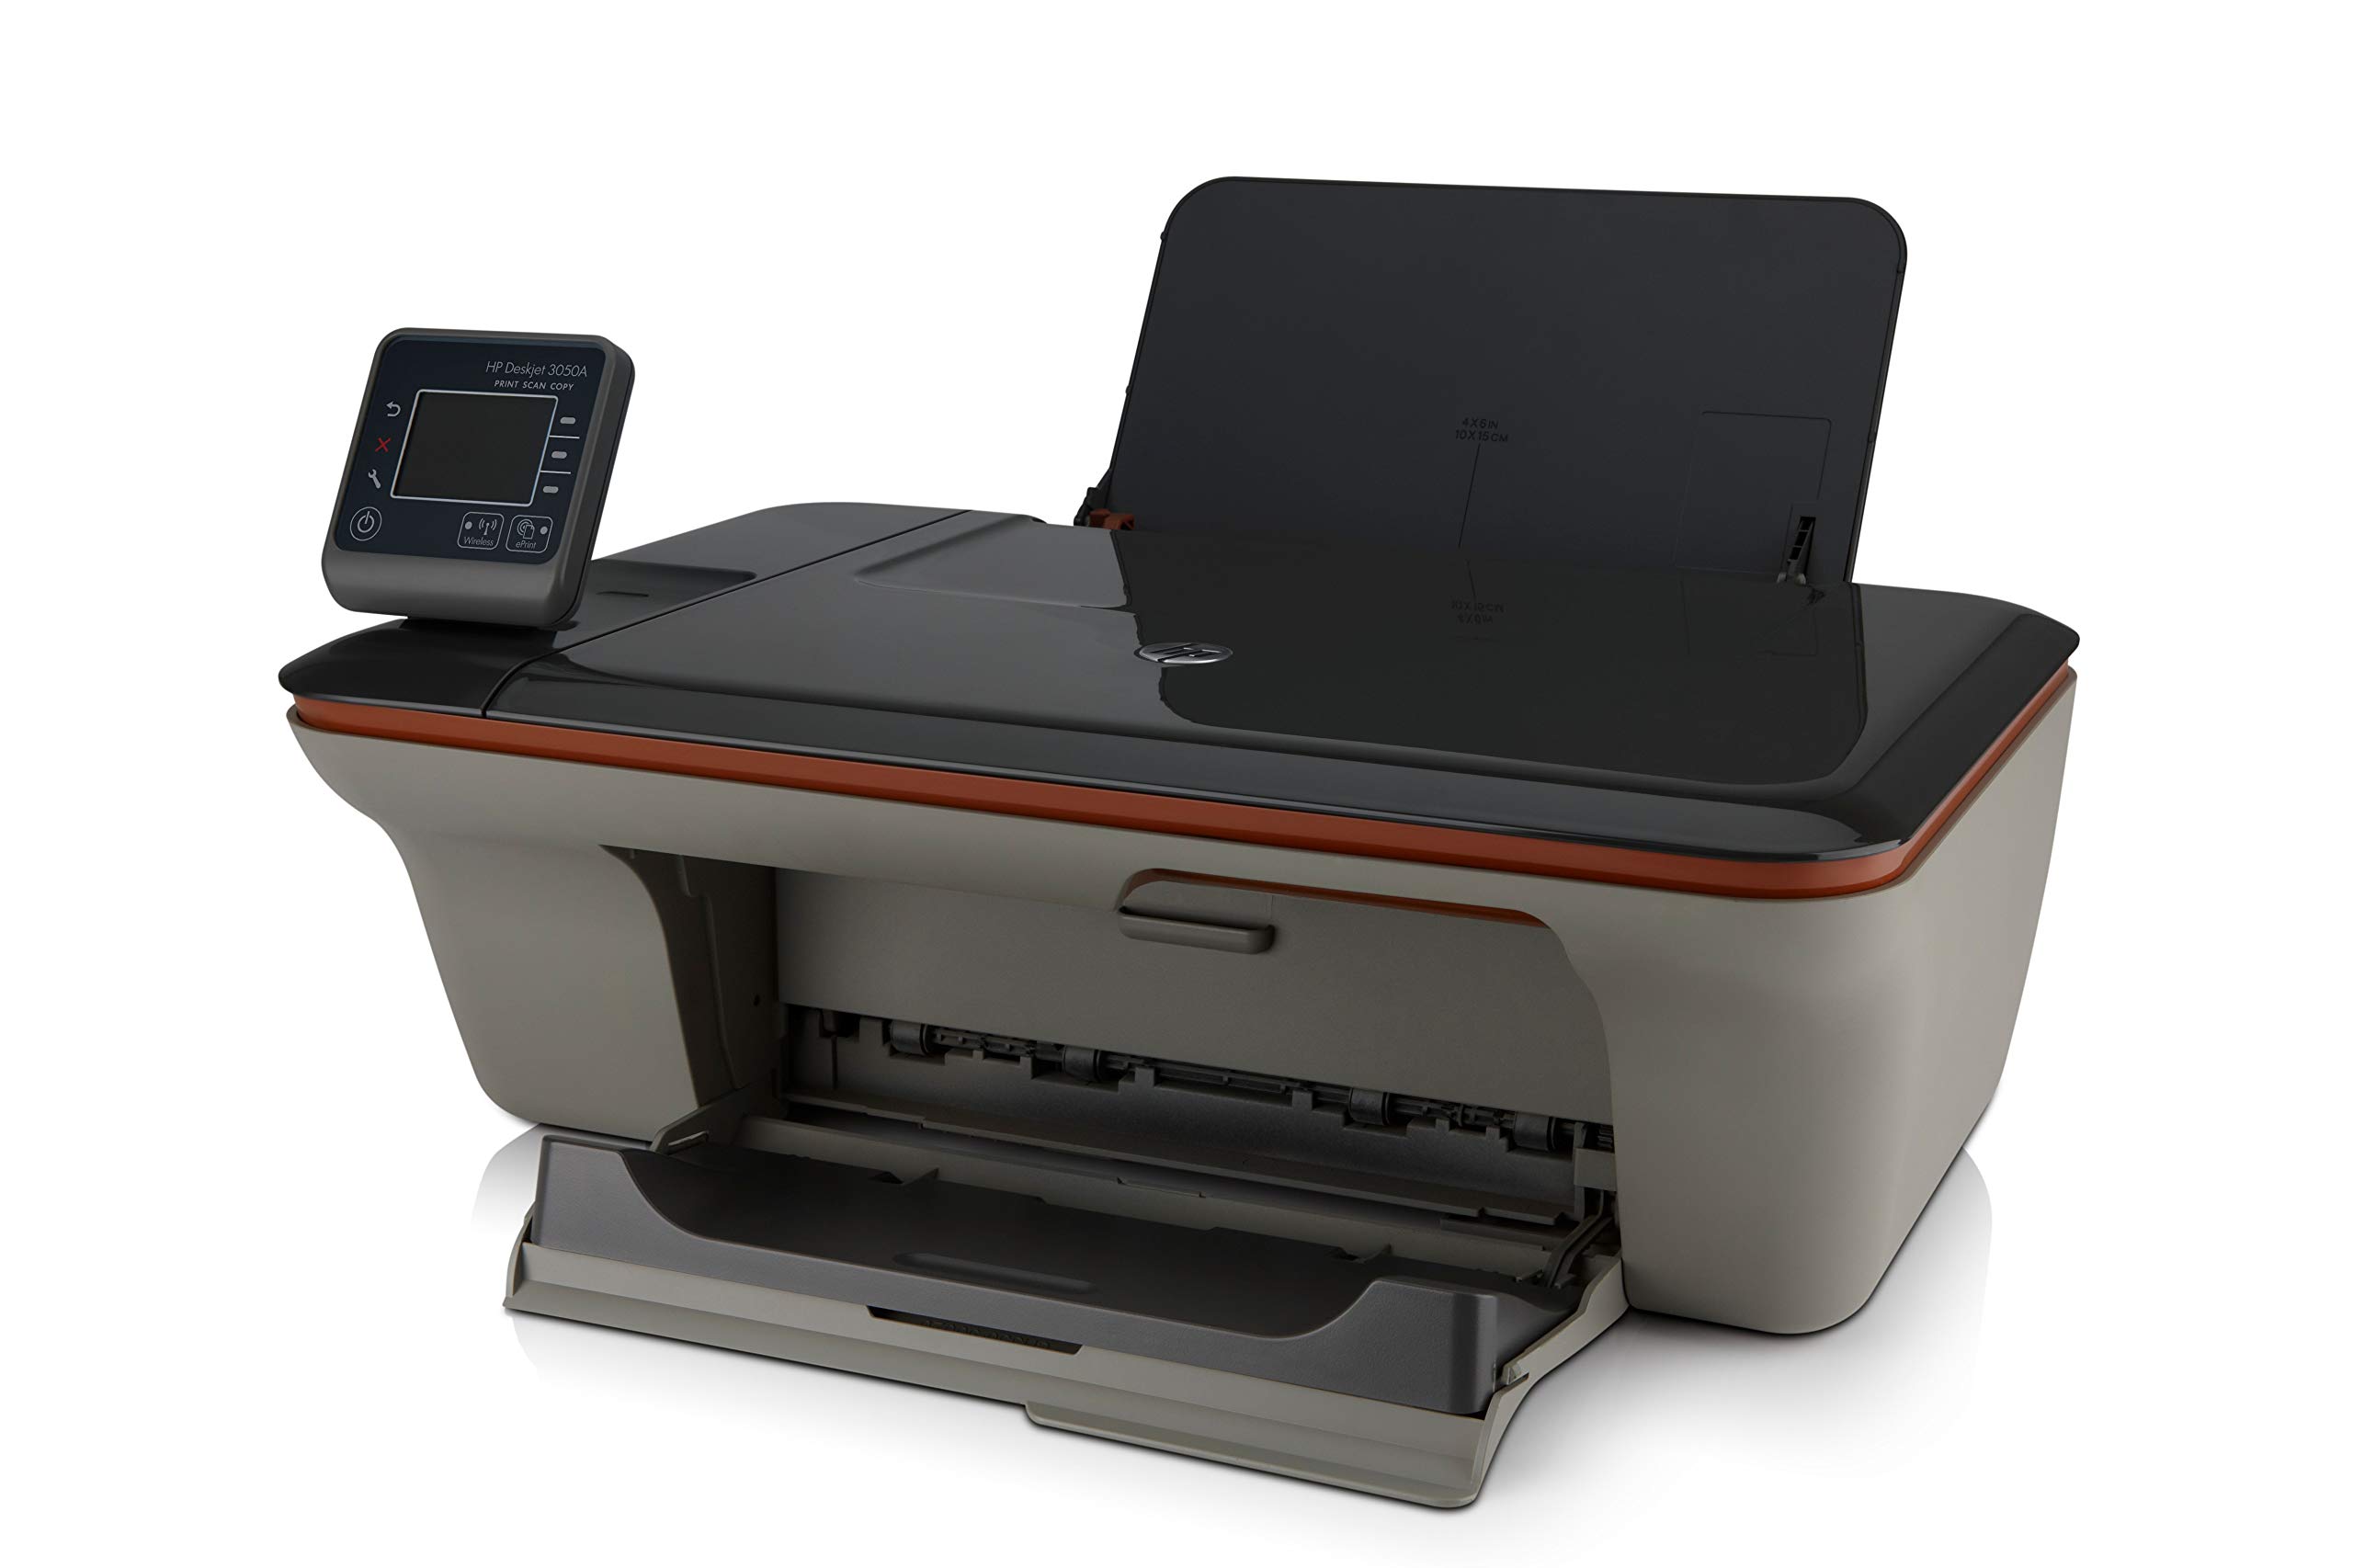 how-to-connect-wireless-printer-hp-deskjet-3050a-j611